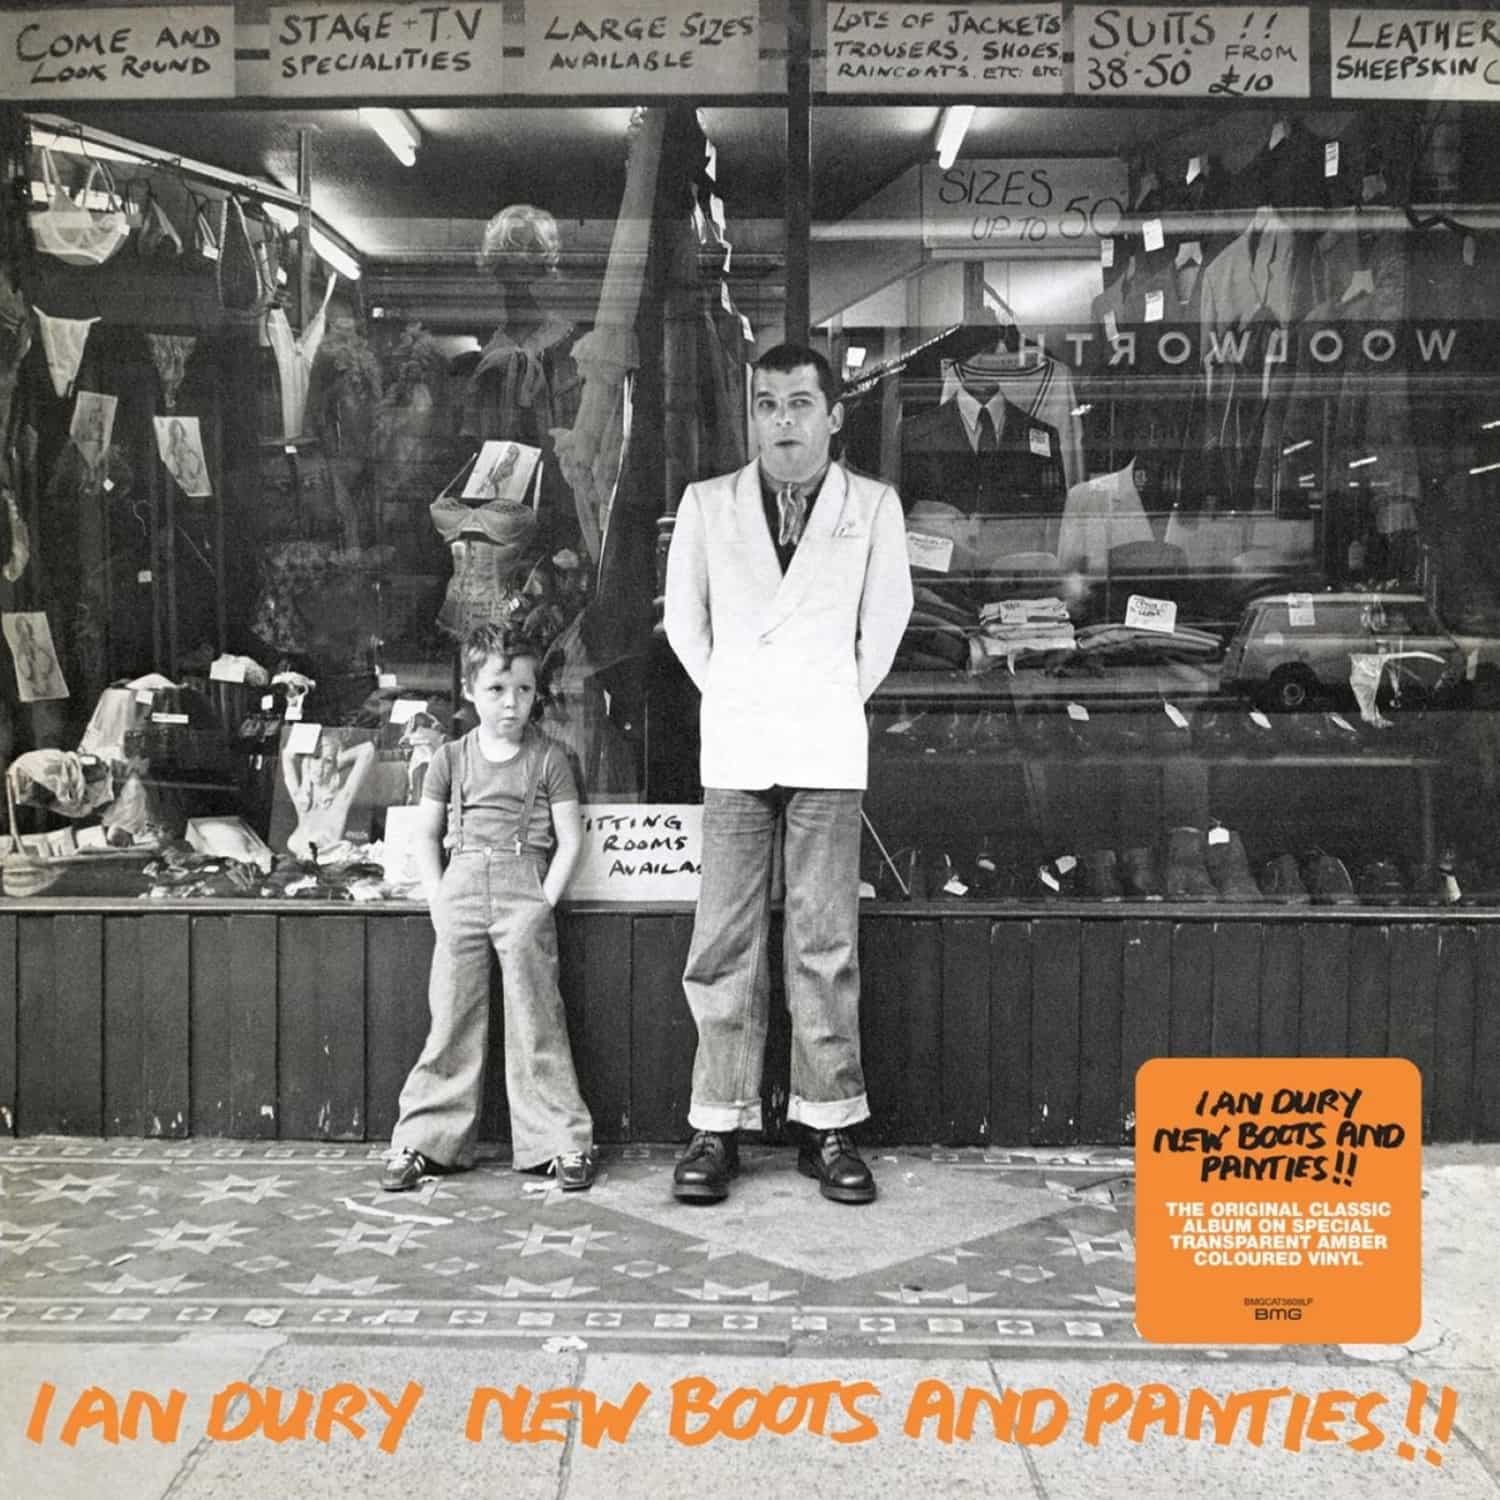 Ian Dury - NEW BOOTS AND PANTIES!! 